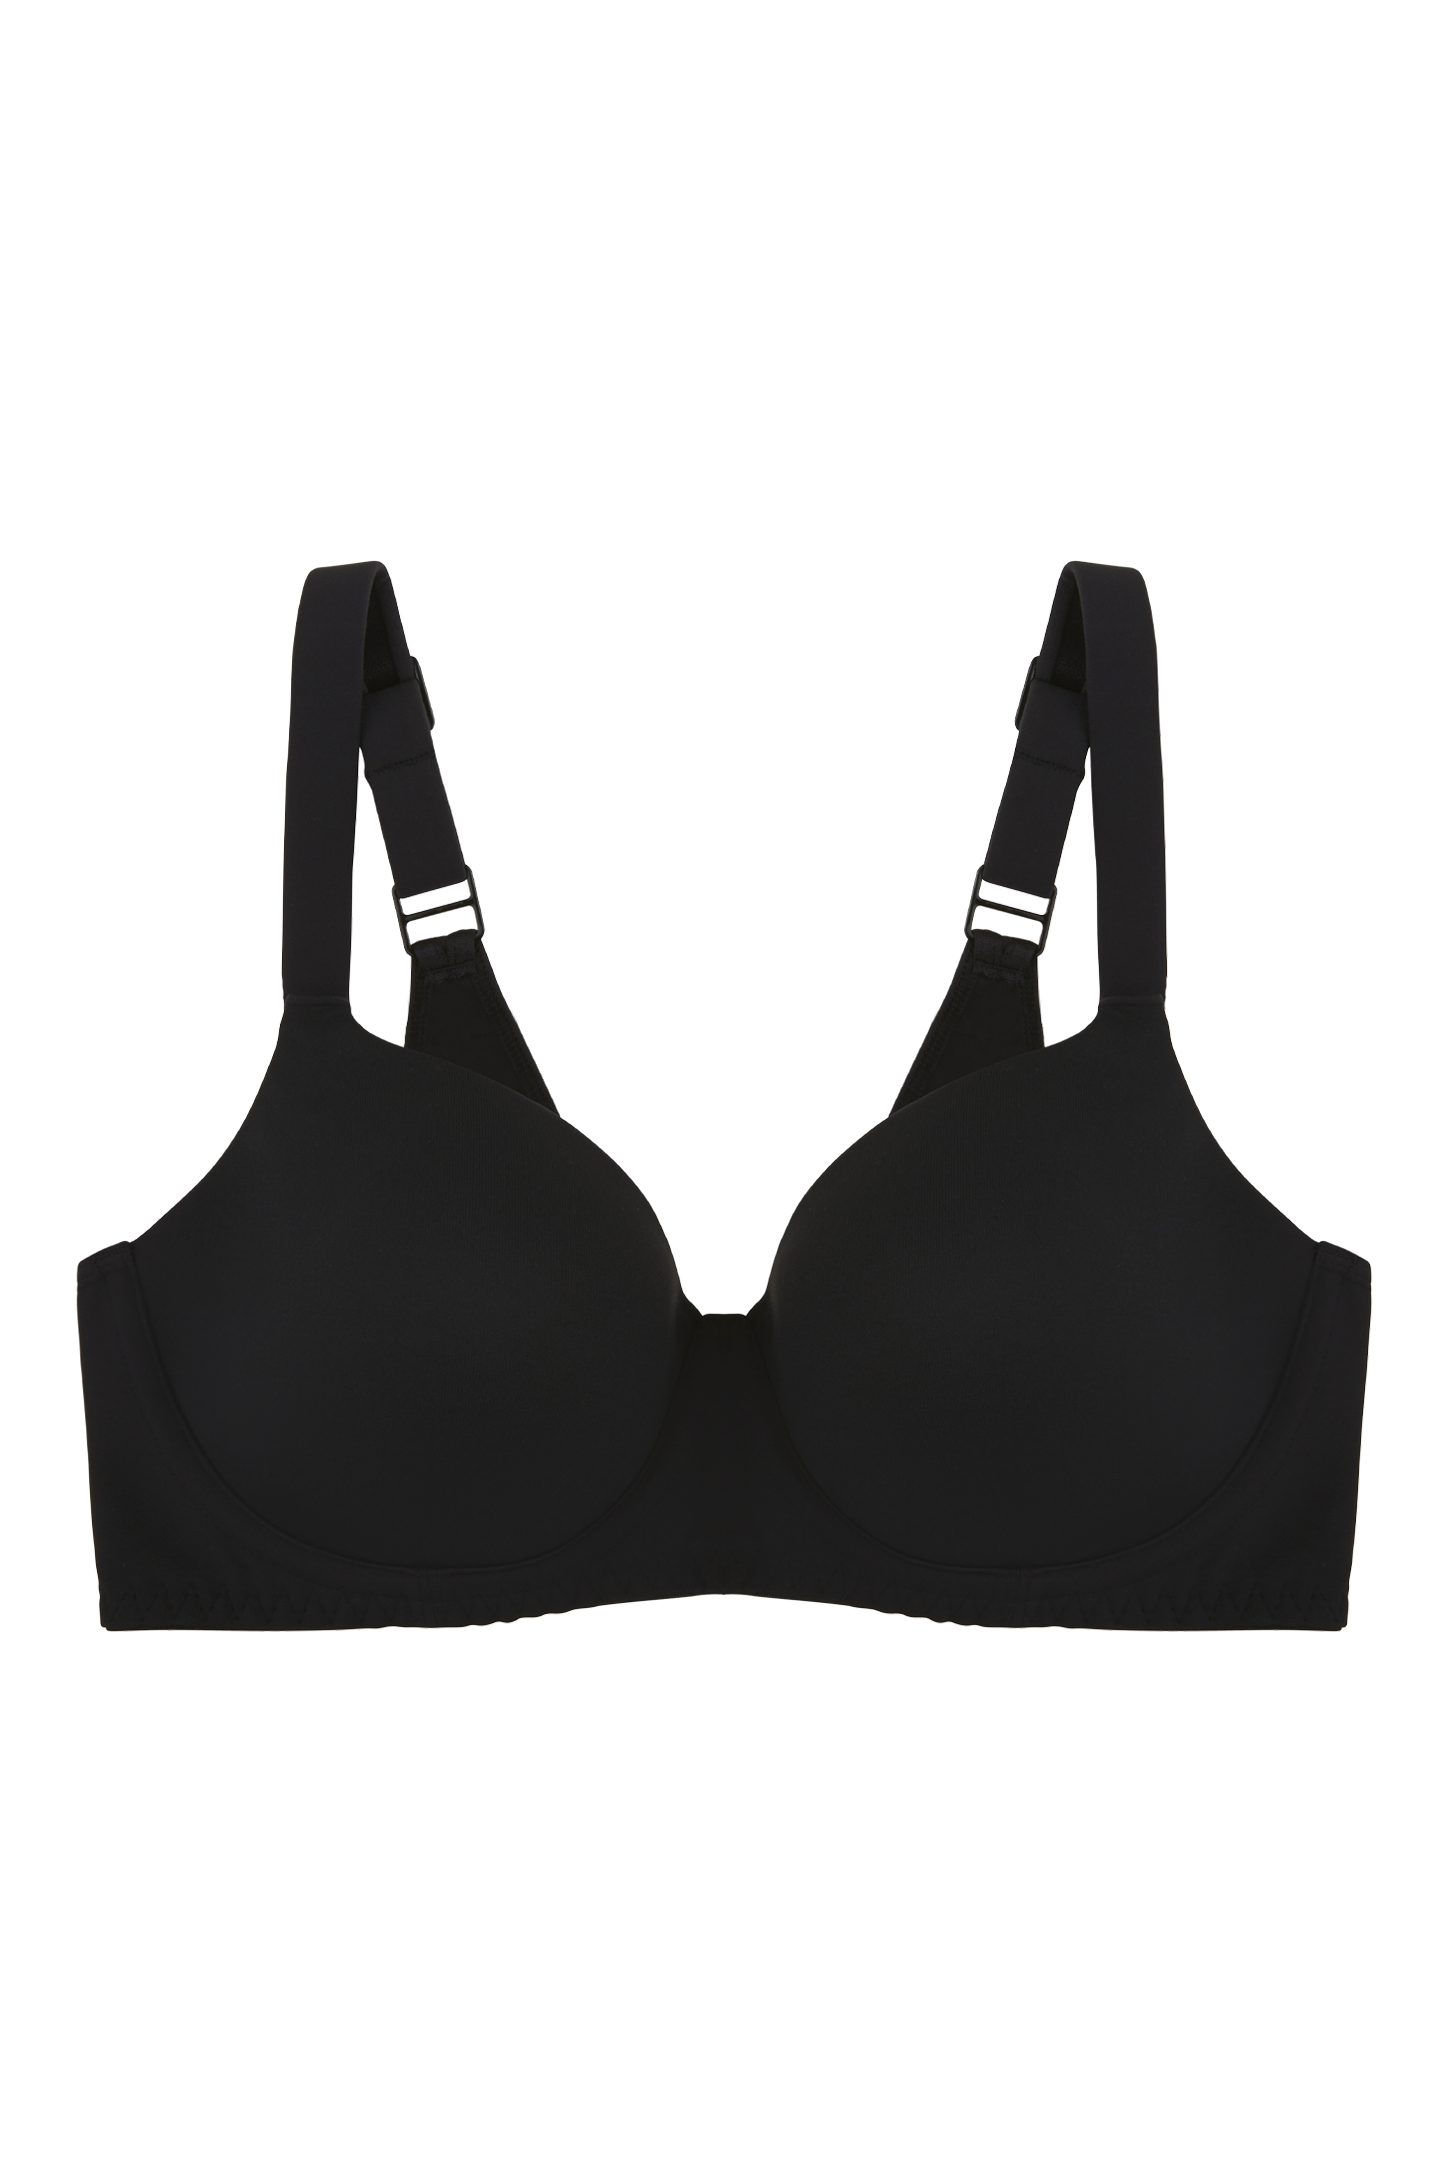 Buy DressBerry Black Solid Non Wired Lightly Padded T Shirt Bra DB